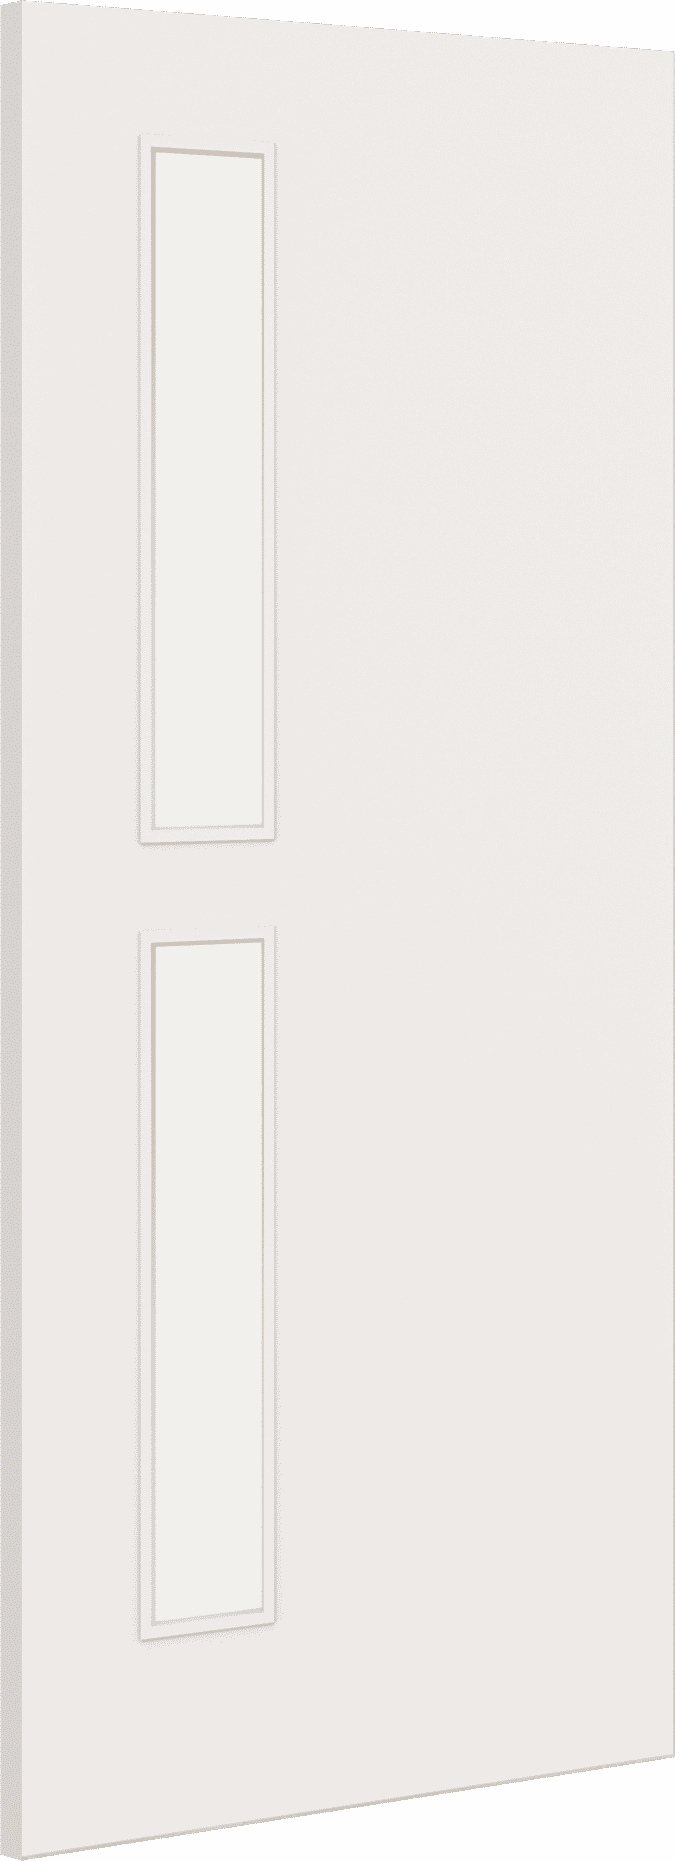 2040mm x 826mm x 44mm Architectural Paint Grade White 07 Frosted Glazed Fire Door Blank